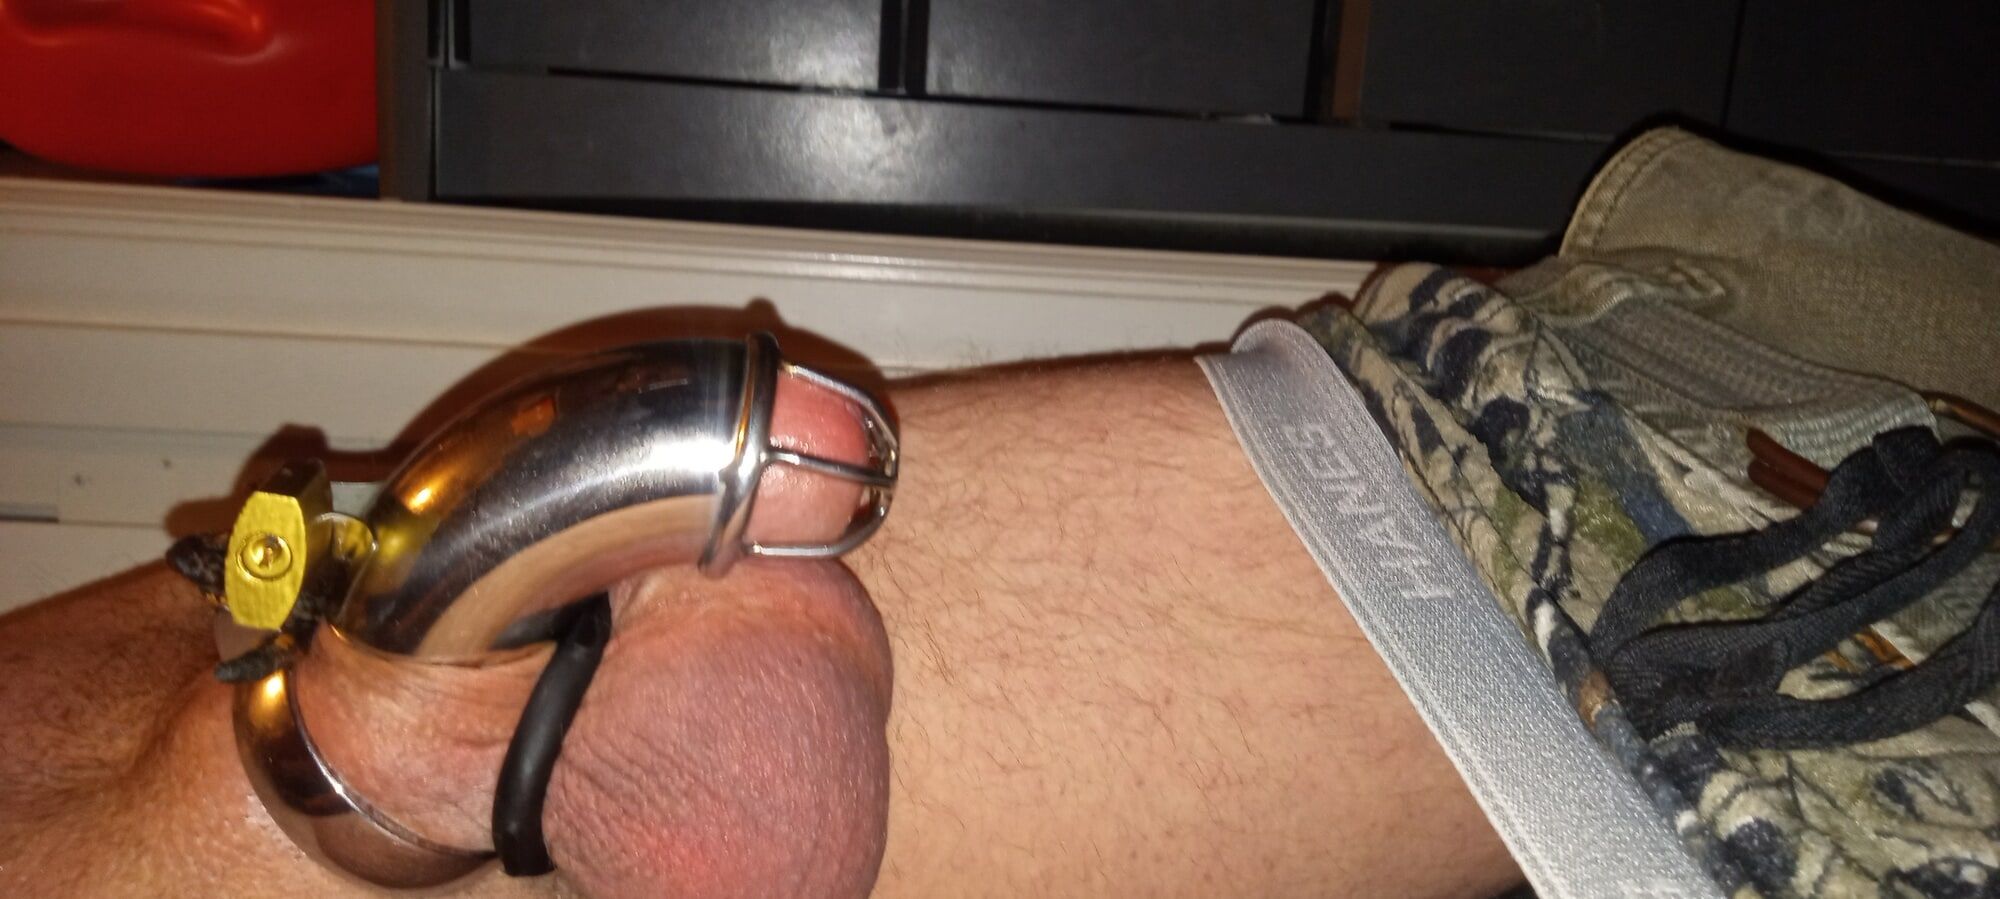 Chastity cage #2